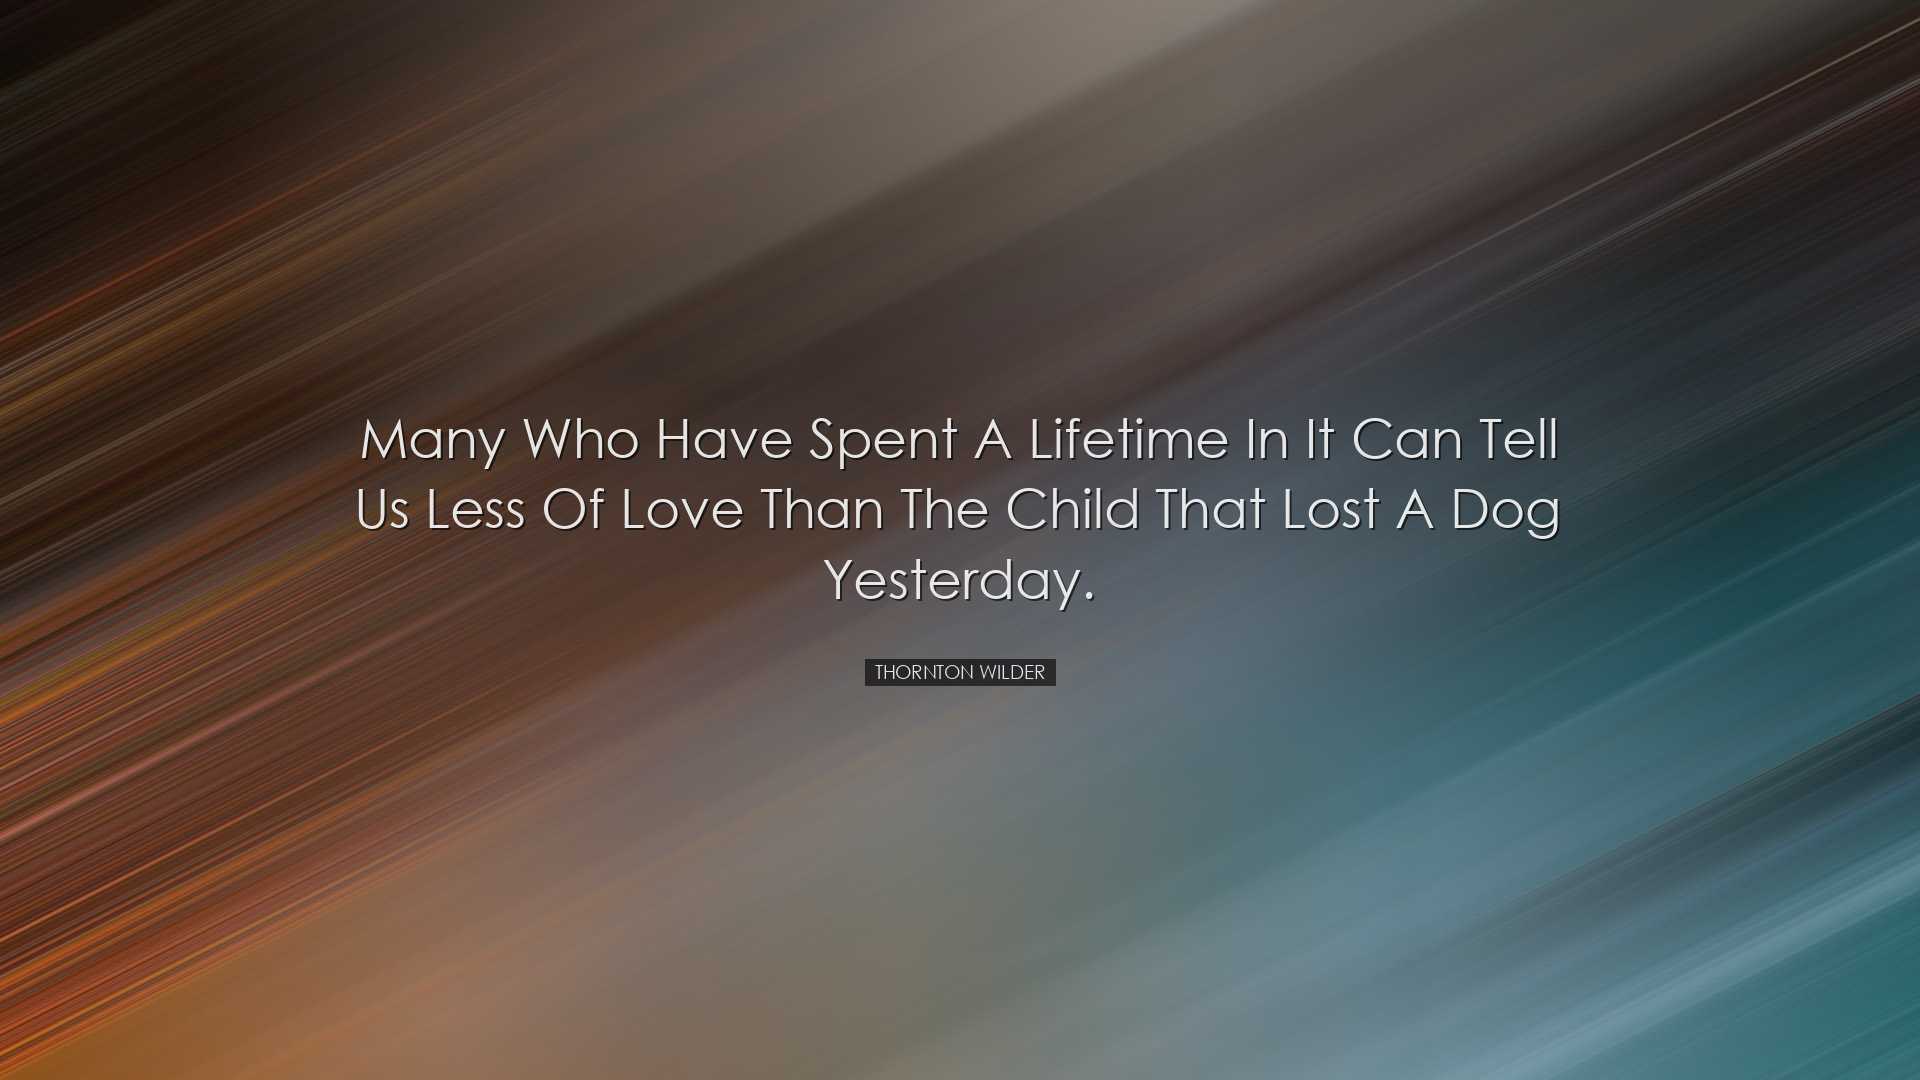 Many who have spent a lifetime in it can tell us less of love than